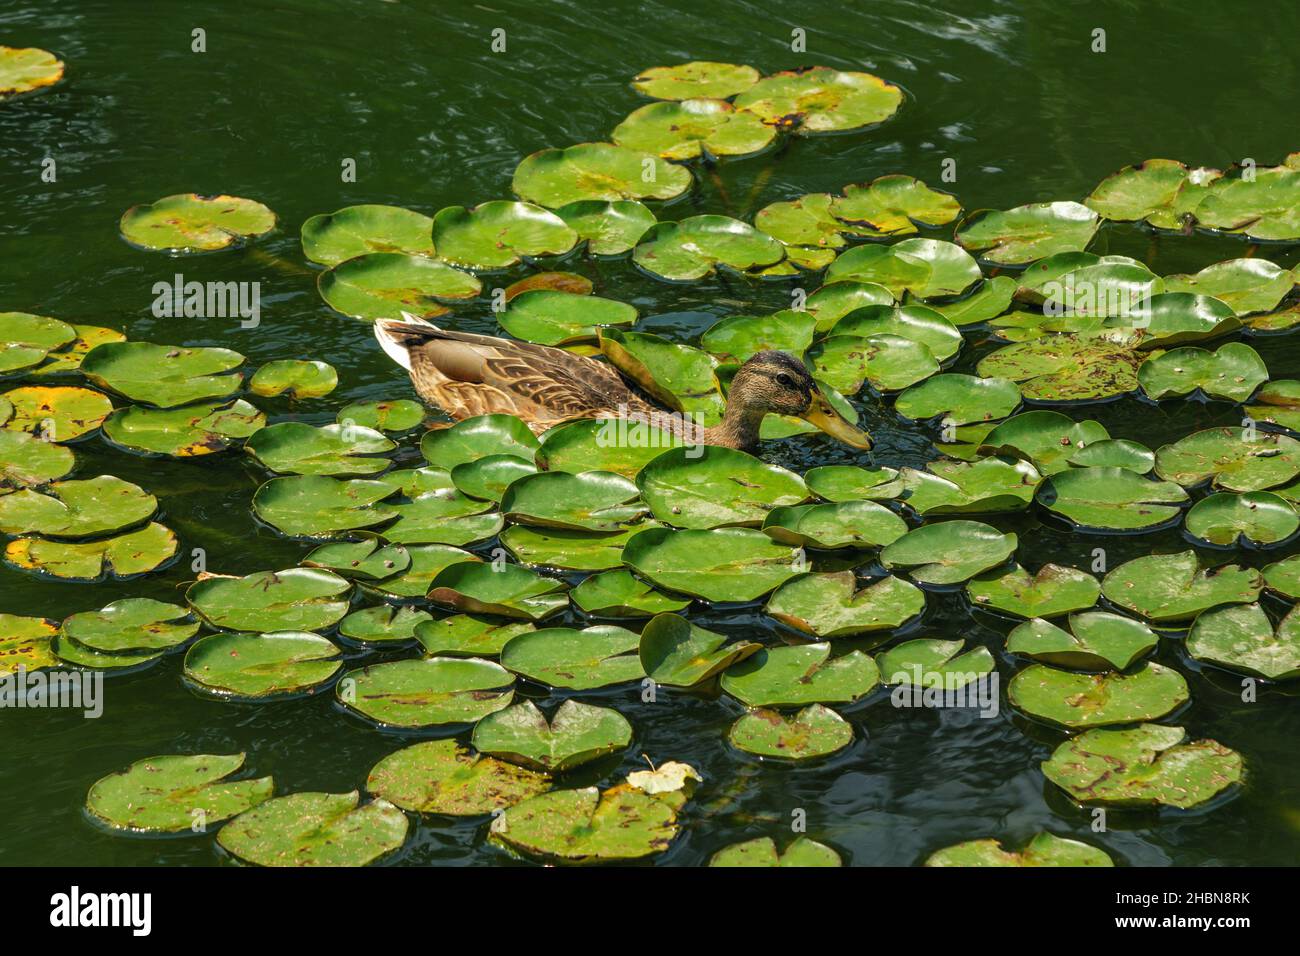 Wild brown mallard duck on a green pond water with water lily leaves on the surface Stock Photo